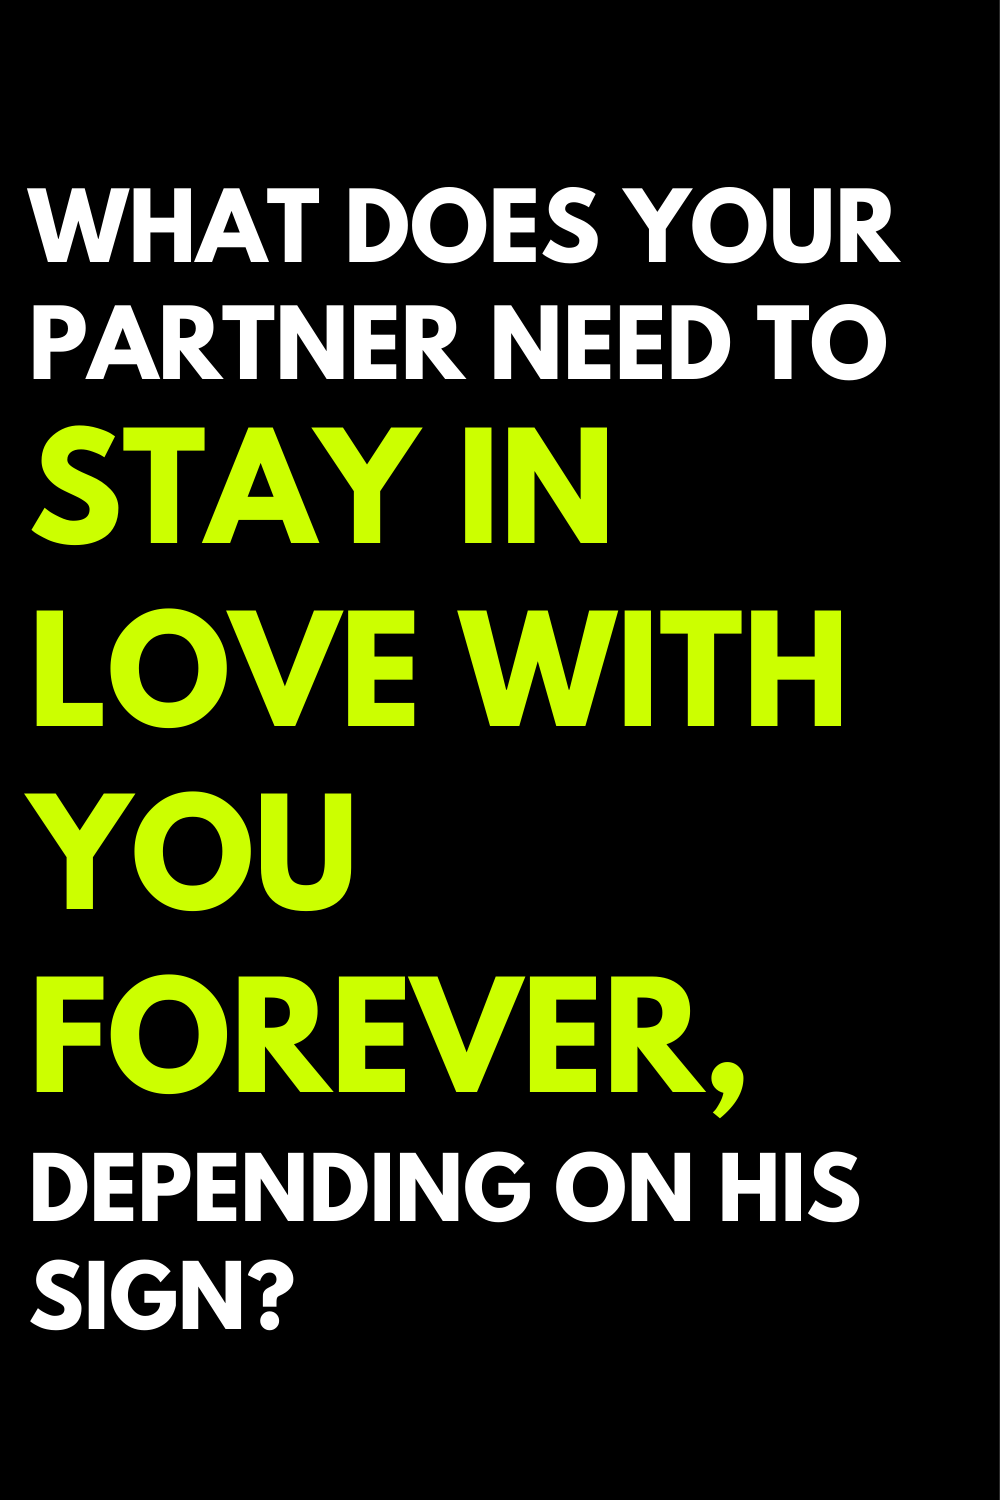 What does your partner need to stay in love with you forever, depending on his sign?